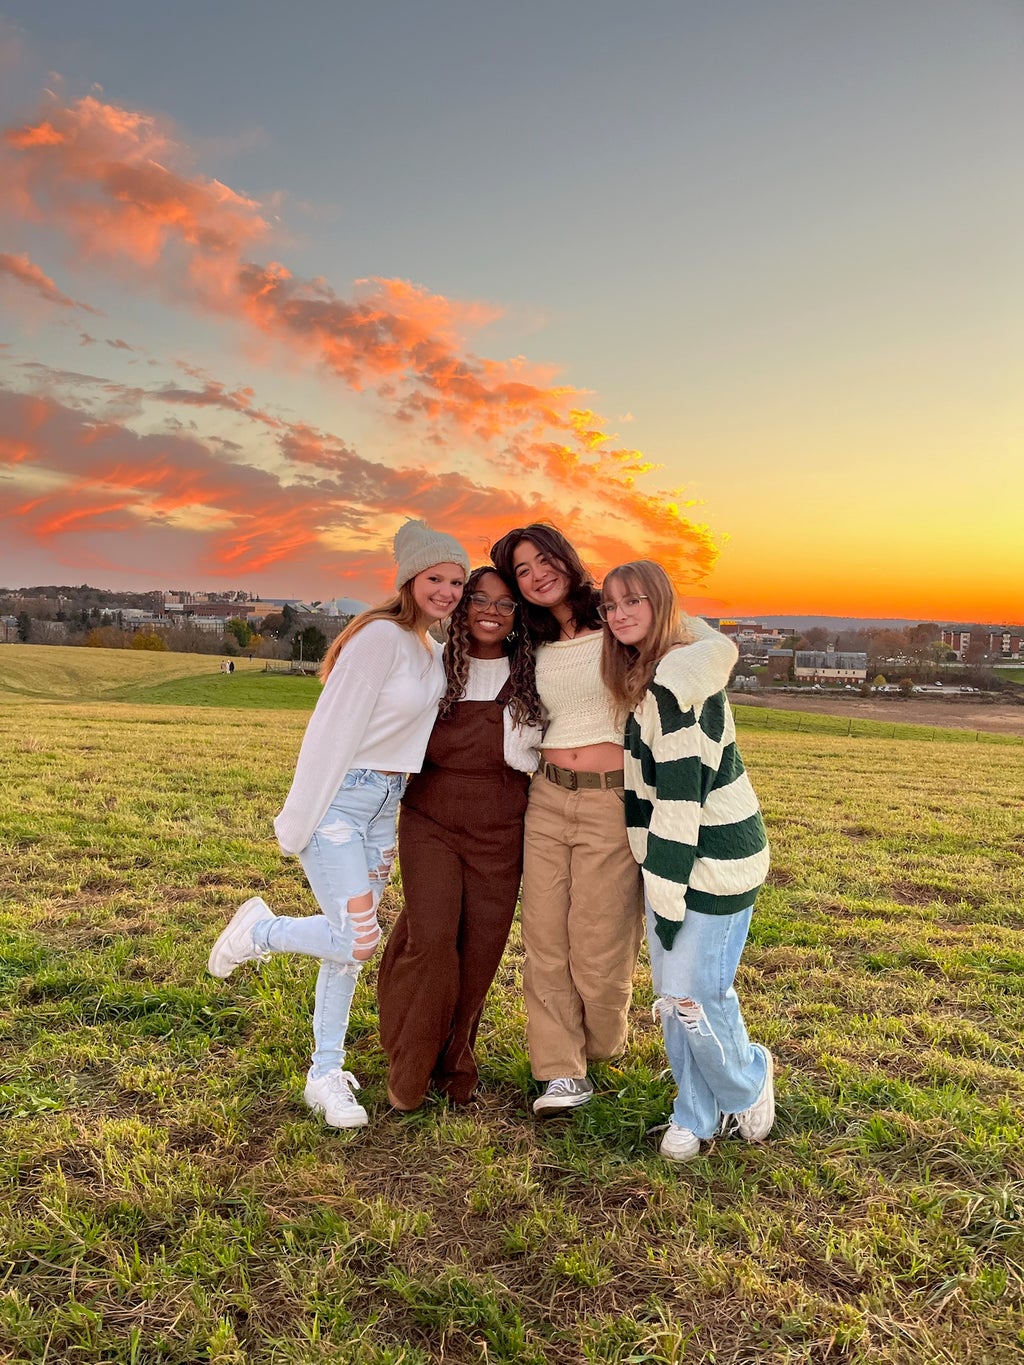 Girls smiling behind a sunset